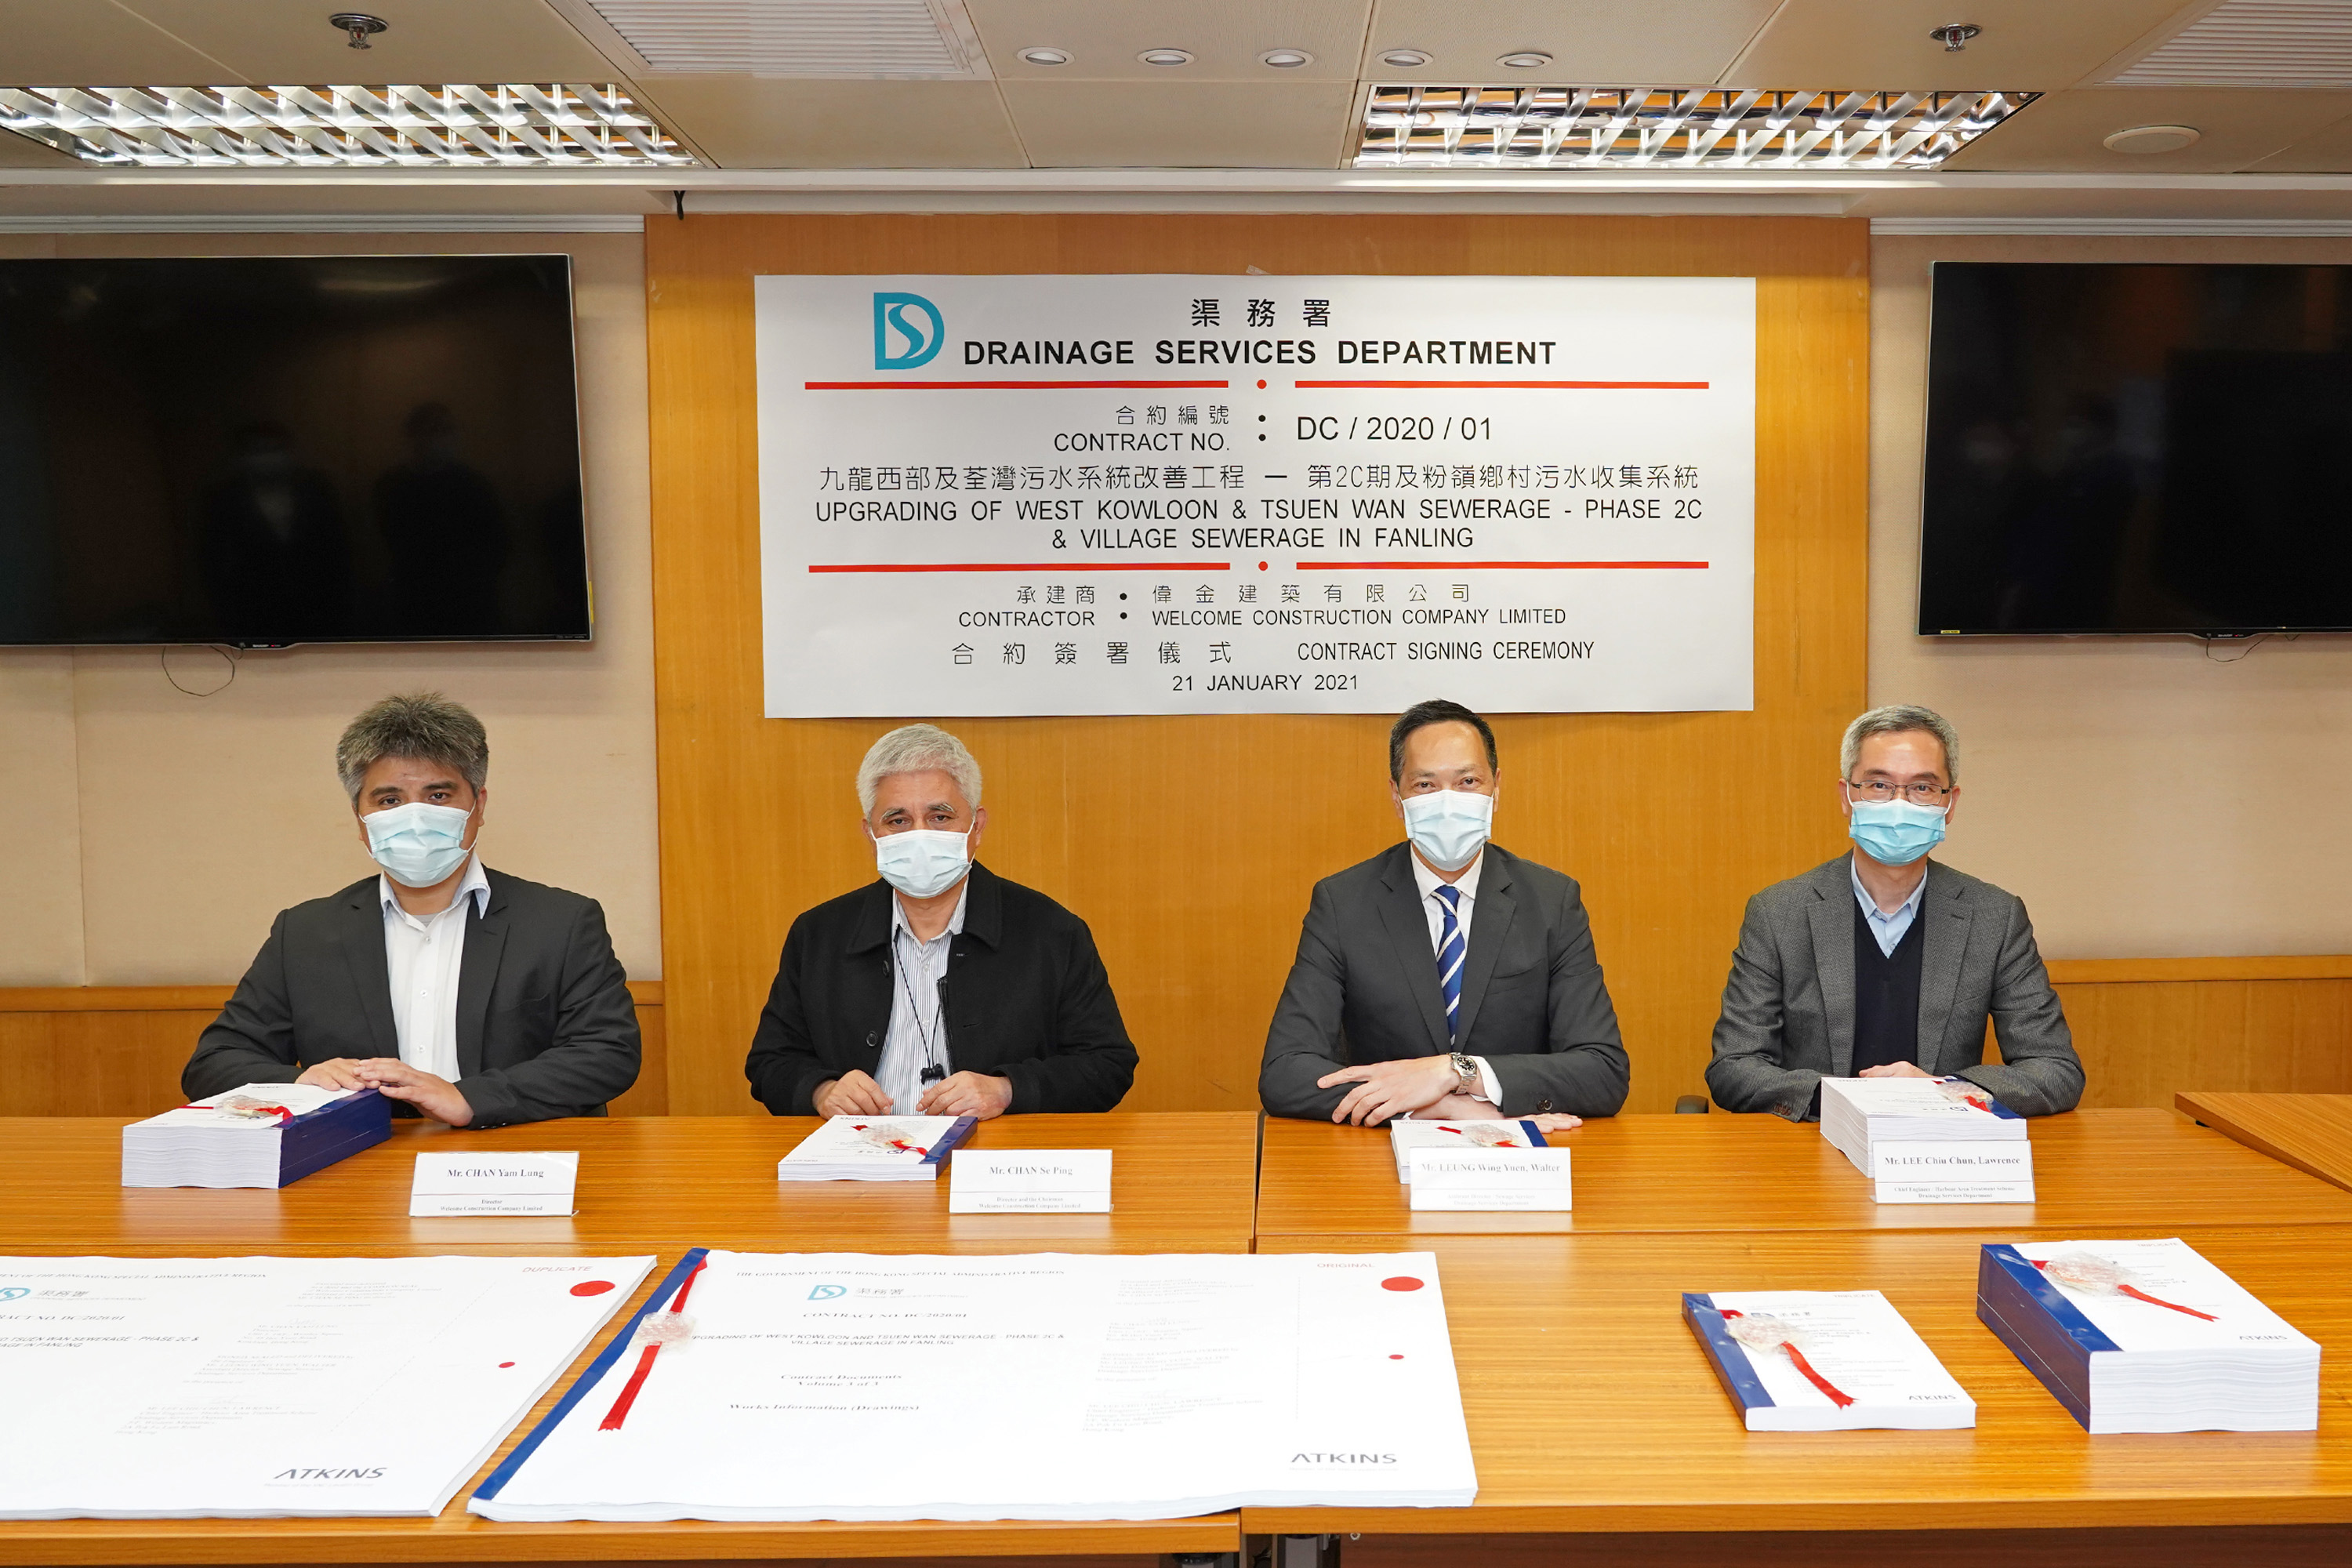 The Assistant Director / Sewage Services of DSD, Mr Walter LEUNG Wing-yuen (second right) and the Director and Chairman of Welcome Construction Company Limited, Mr CHAN Se-ping (second left), attended the Contract Signing Ceremony